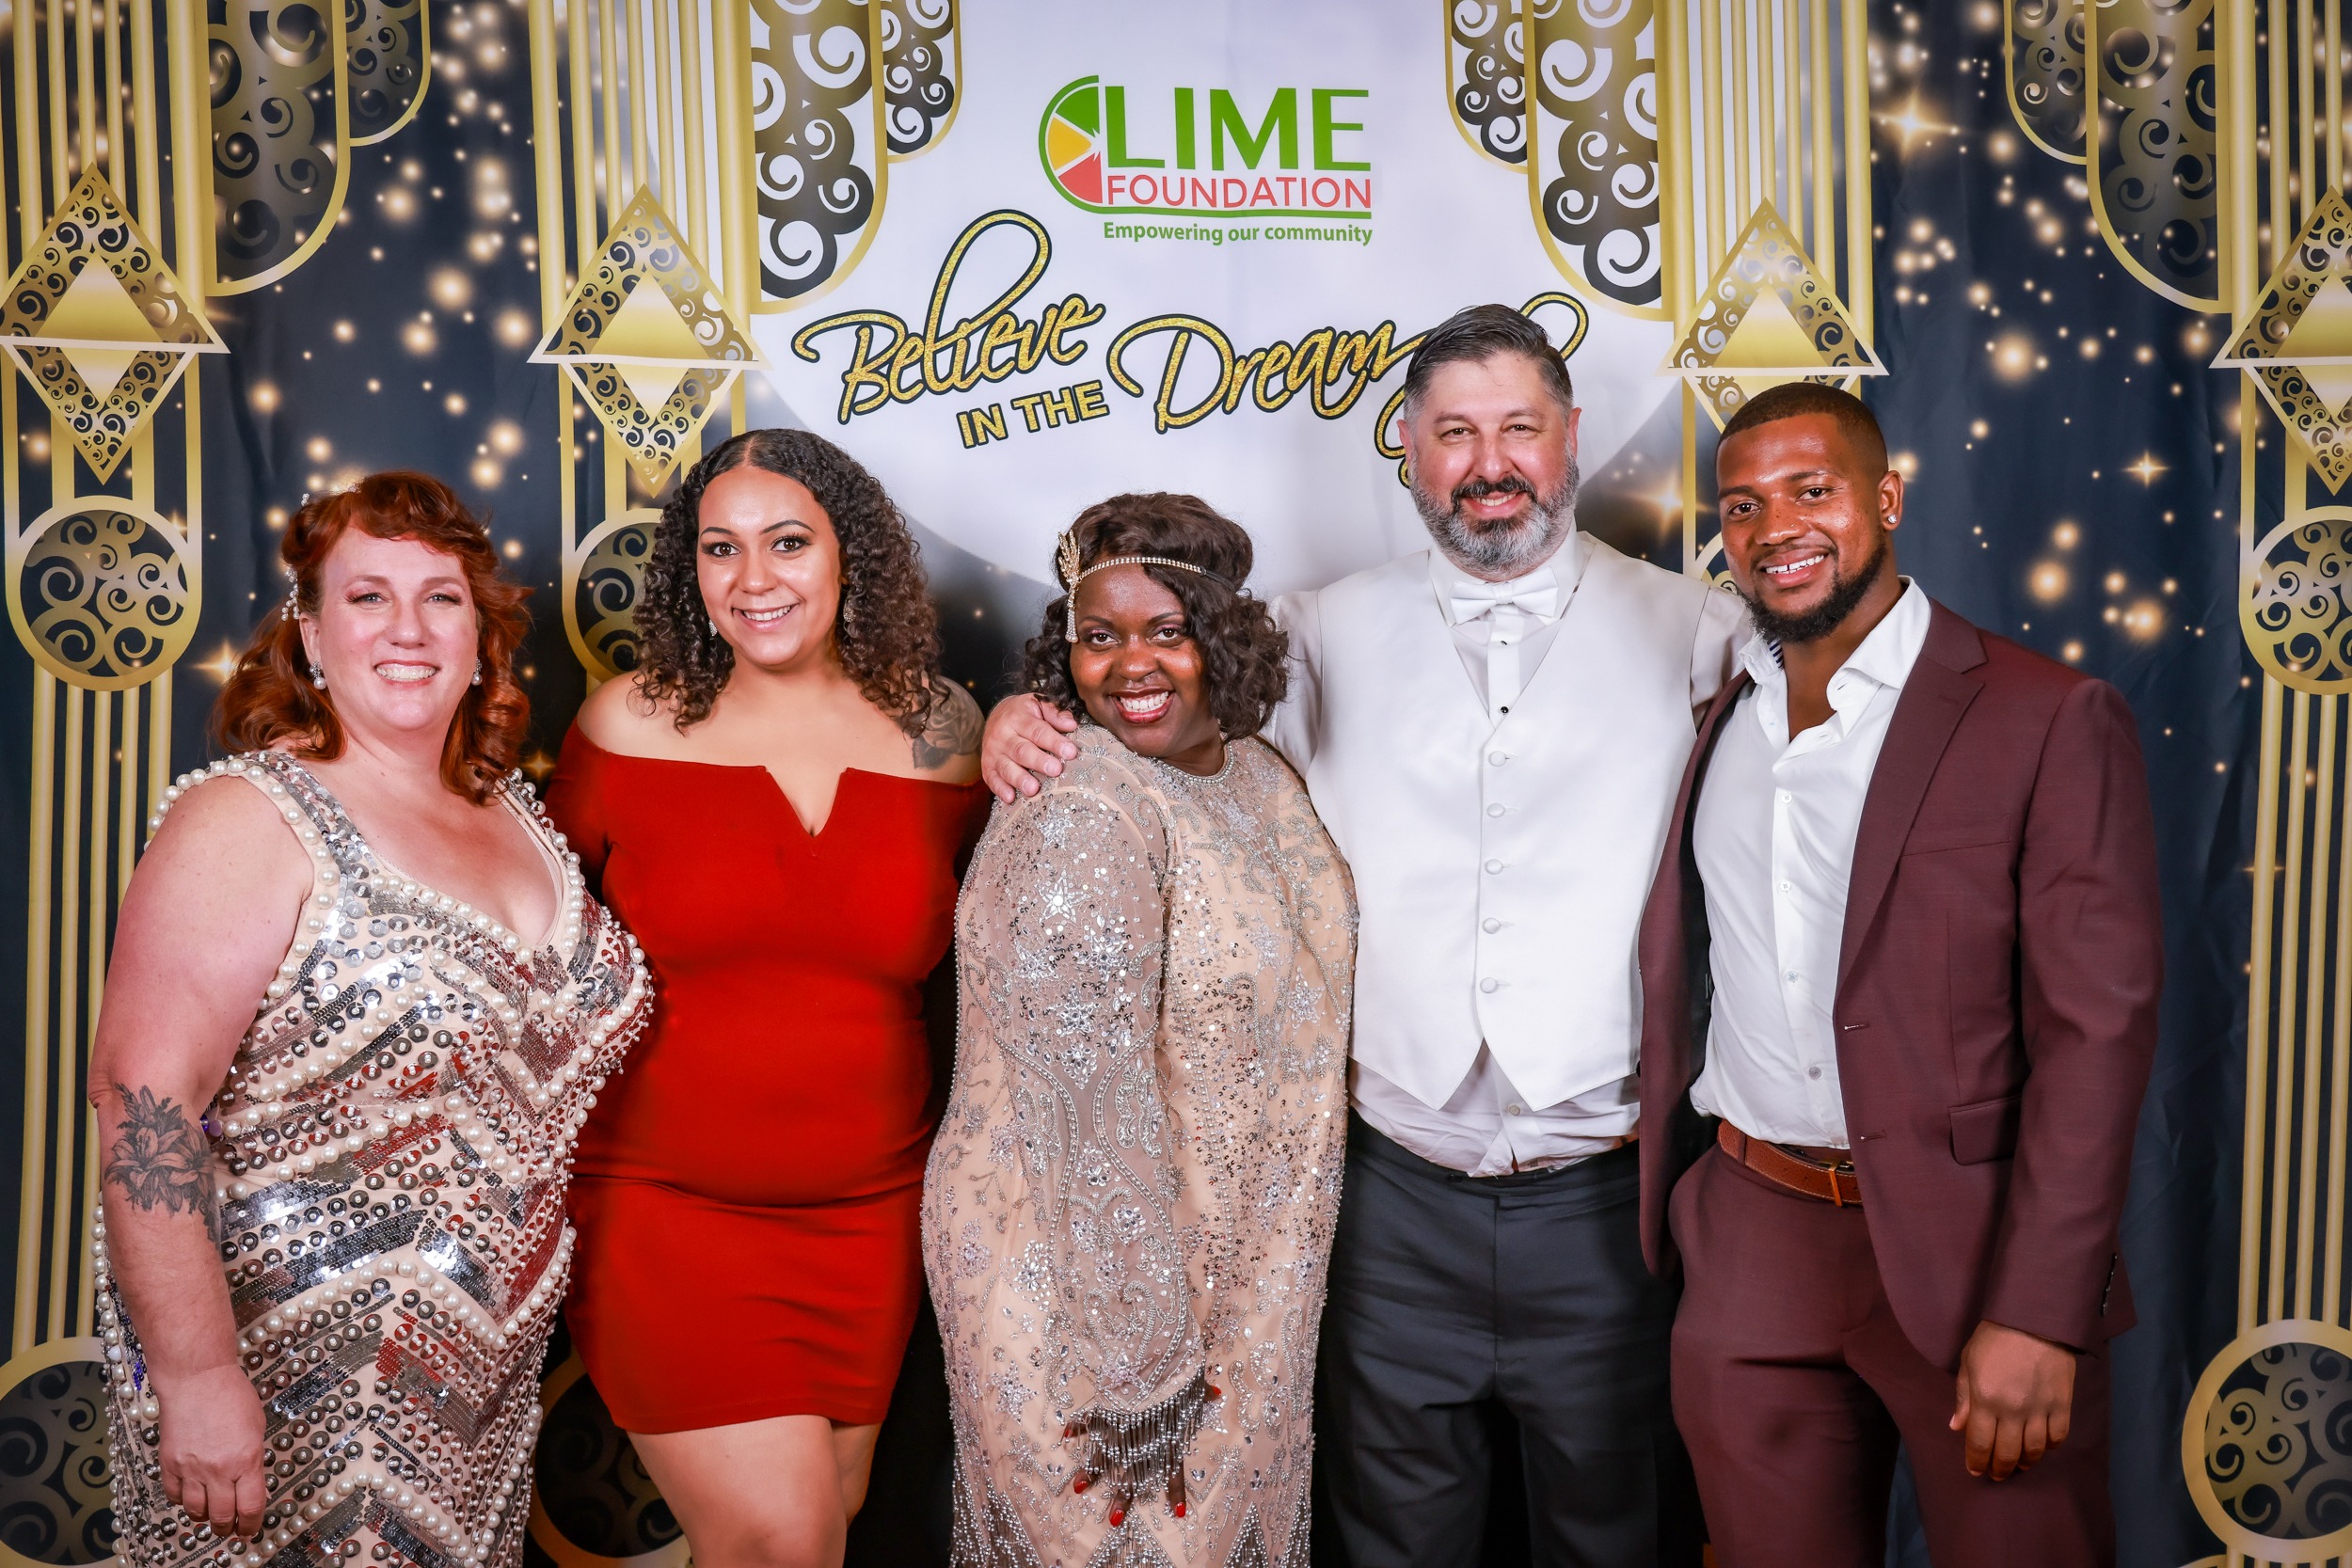 A group of people posing for a photo at an event hosted by The LIME Foundation of Santa Rosa.